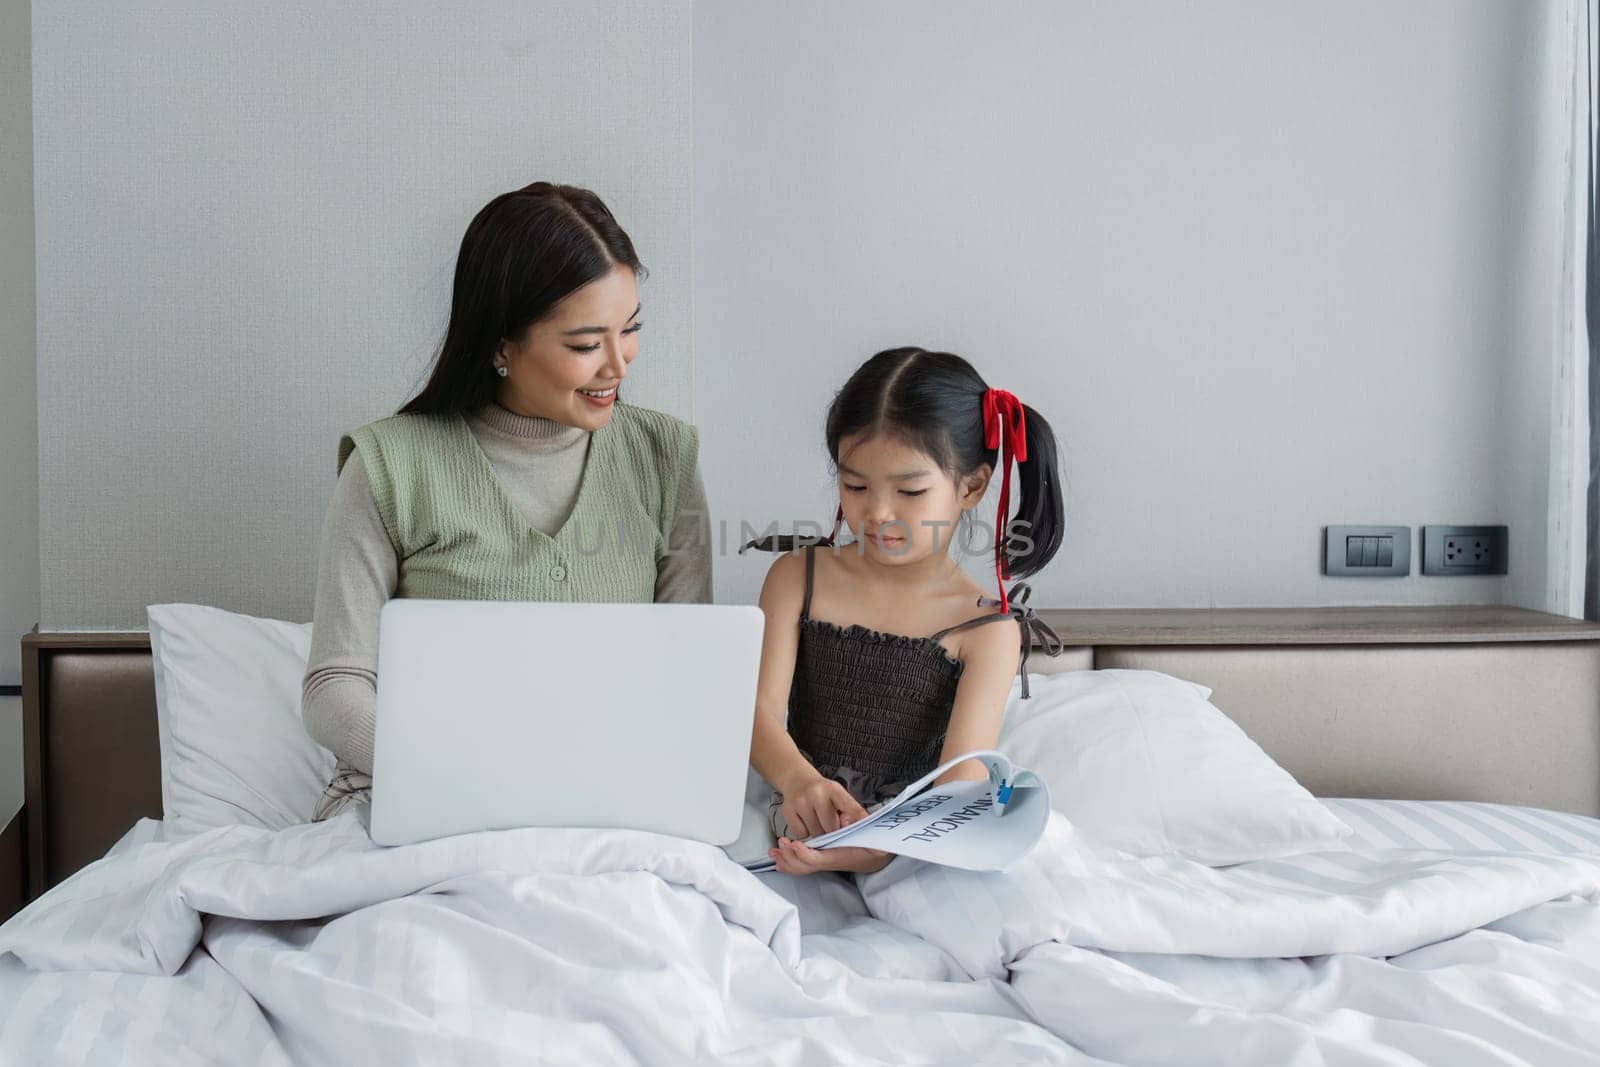 Work from home, freelance and lifestyle concept. Portrait of creative asian female sitting on bed with laptop and her take care of her kid while working by itchaznong